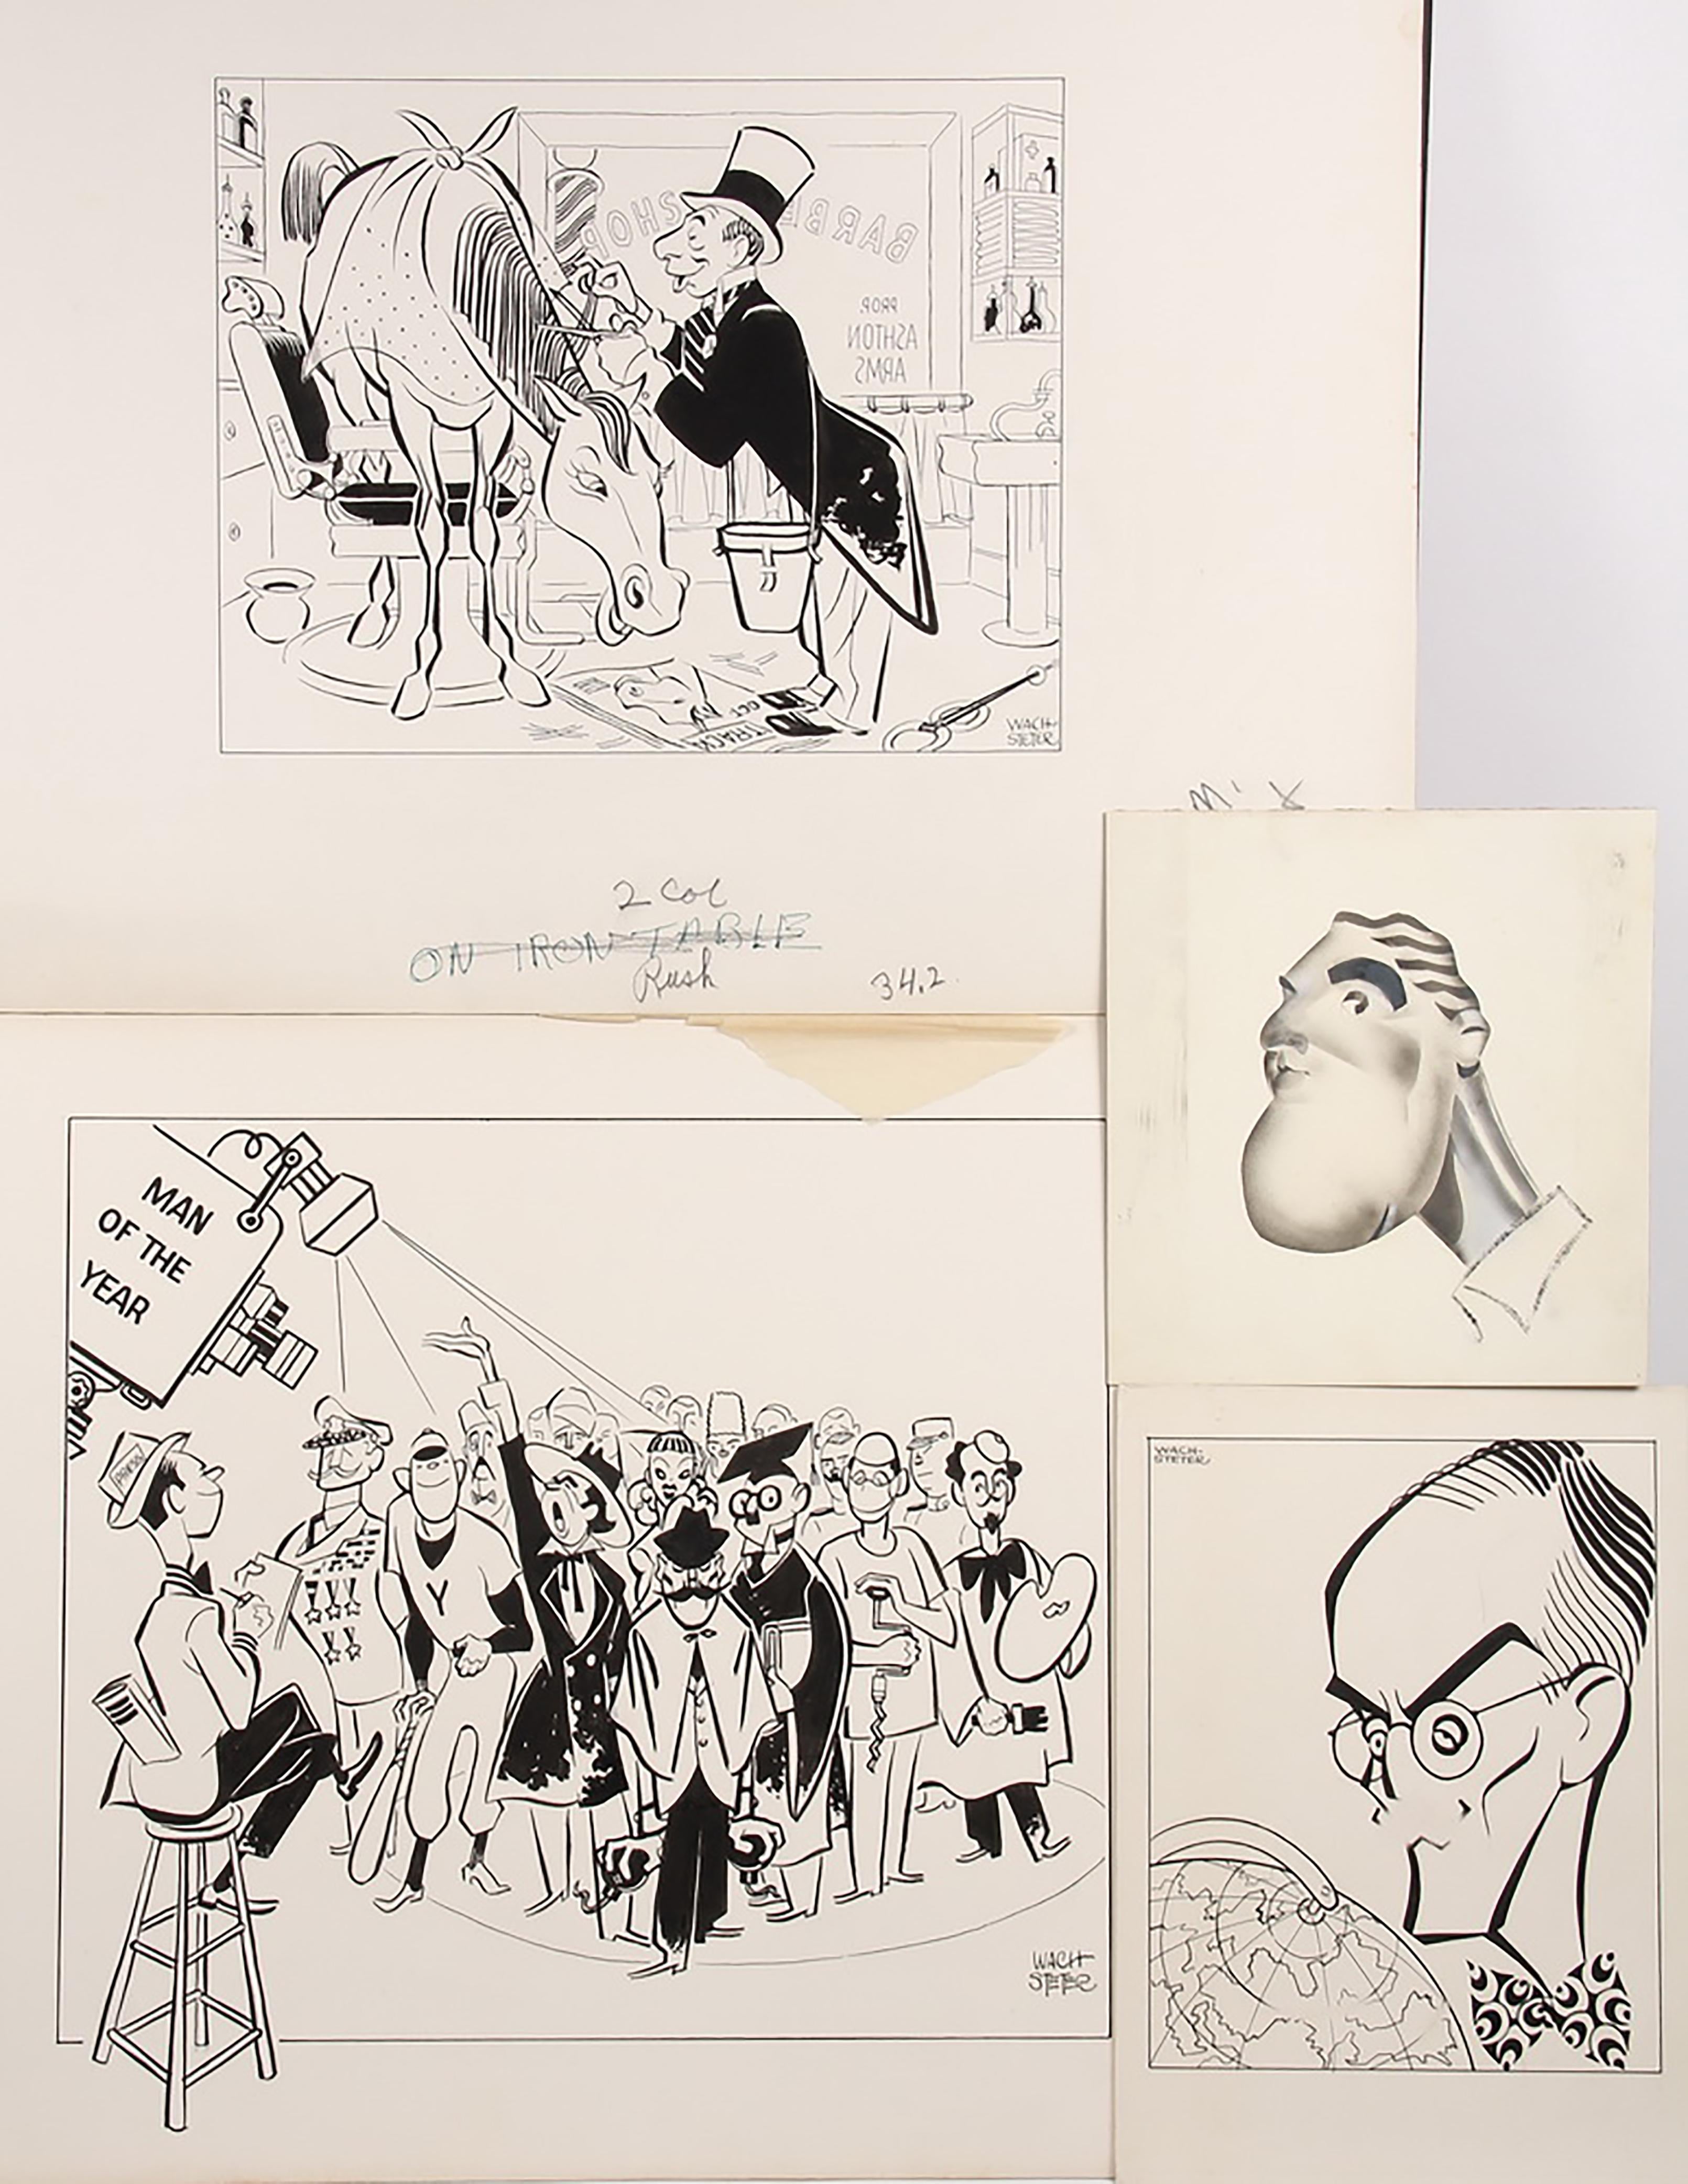 Caricatures of Unknown Shows and Subjects